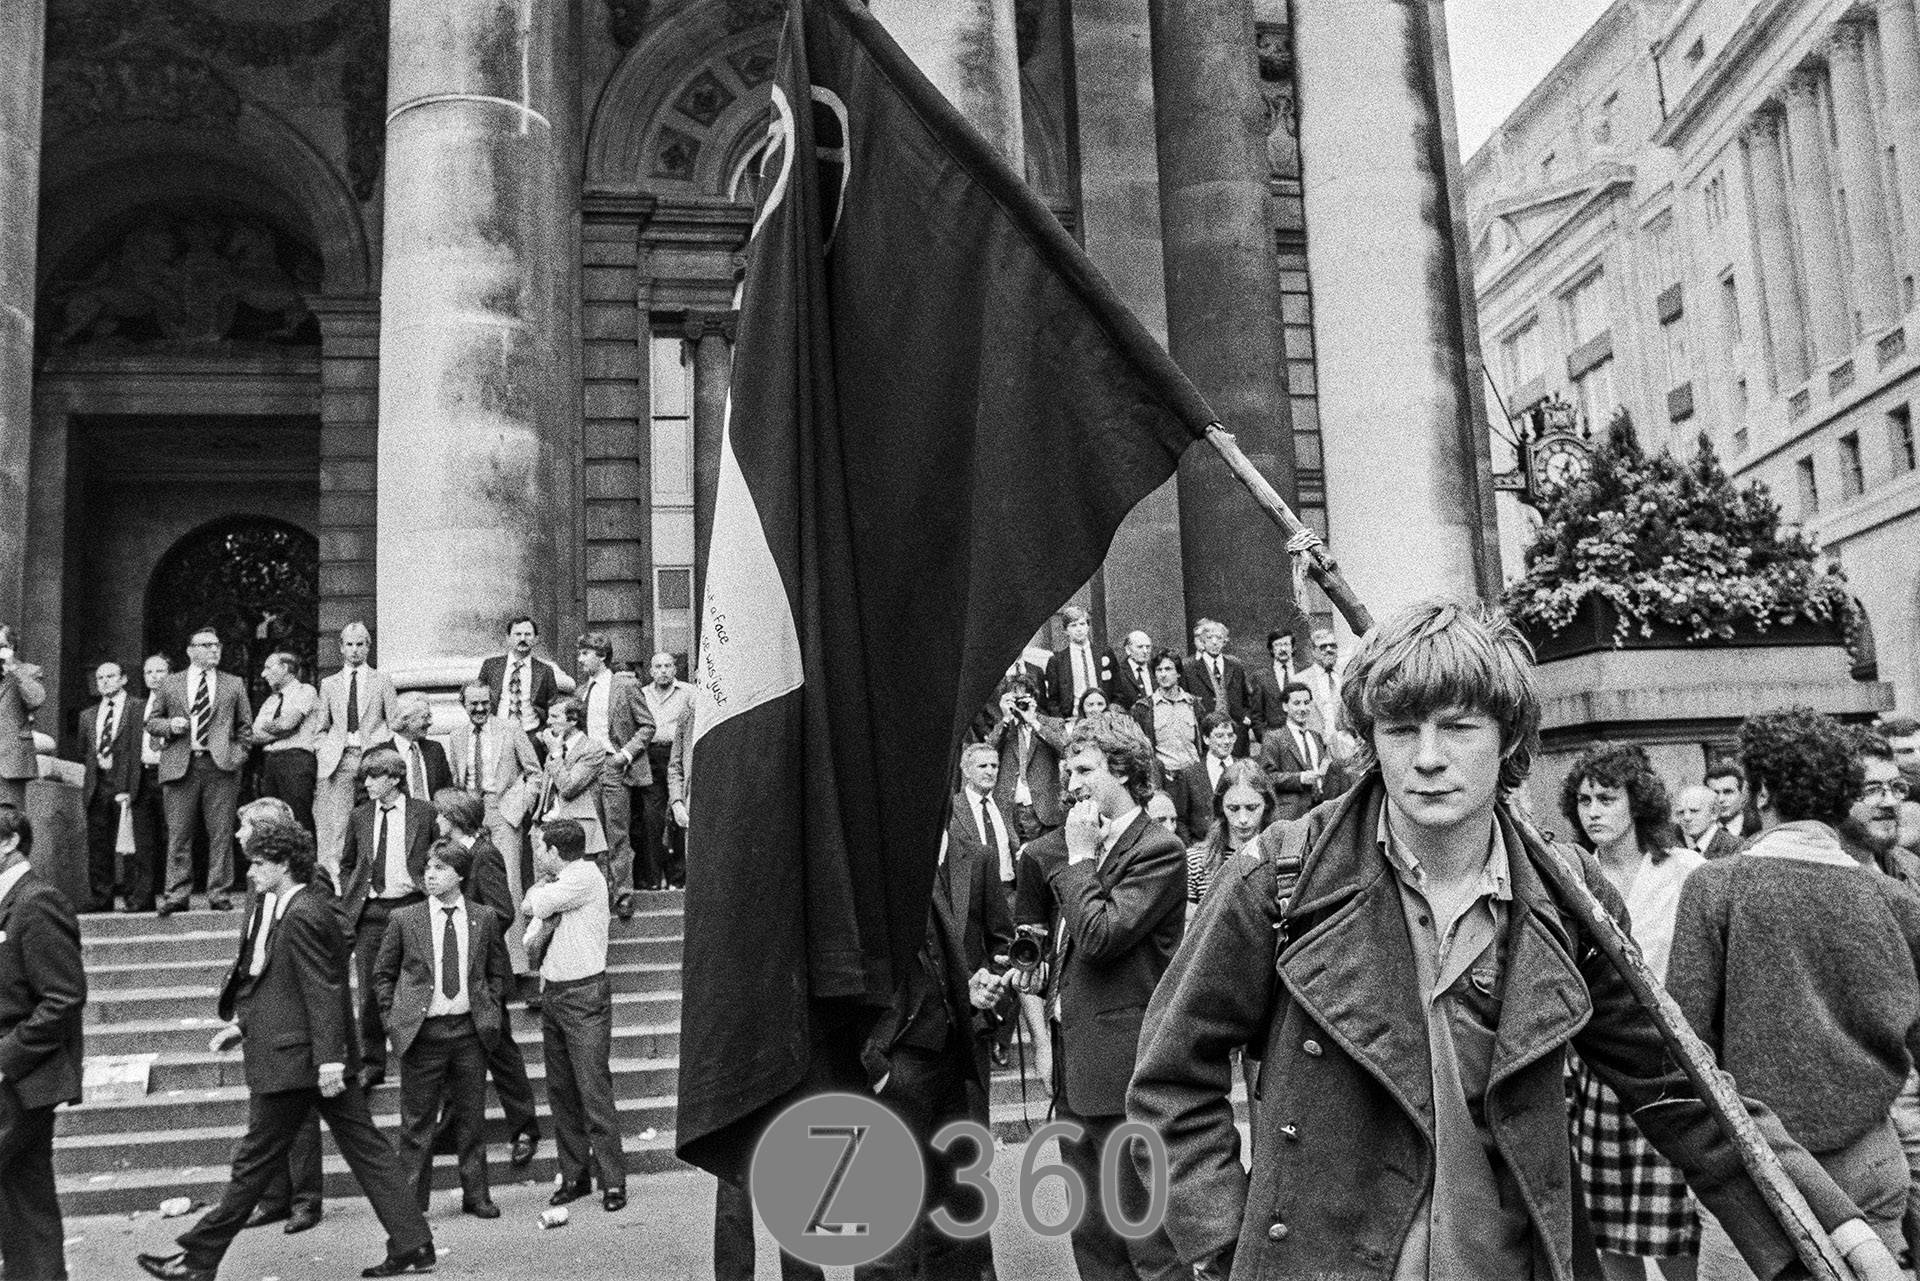 Anarchists arrive at The Royal Exchange